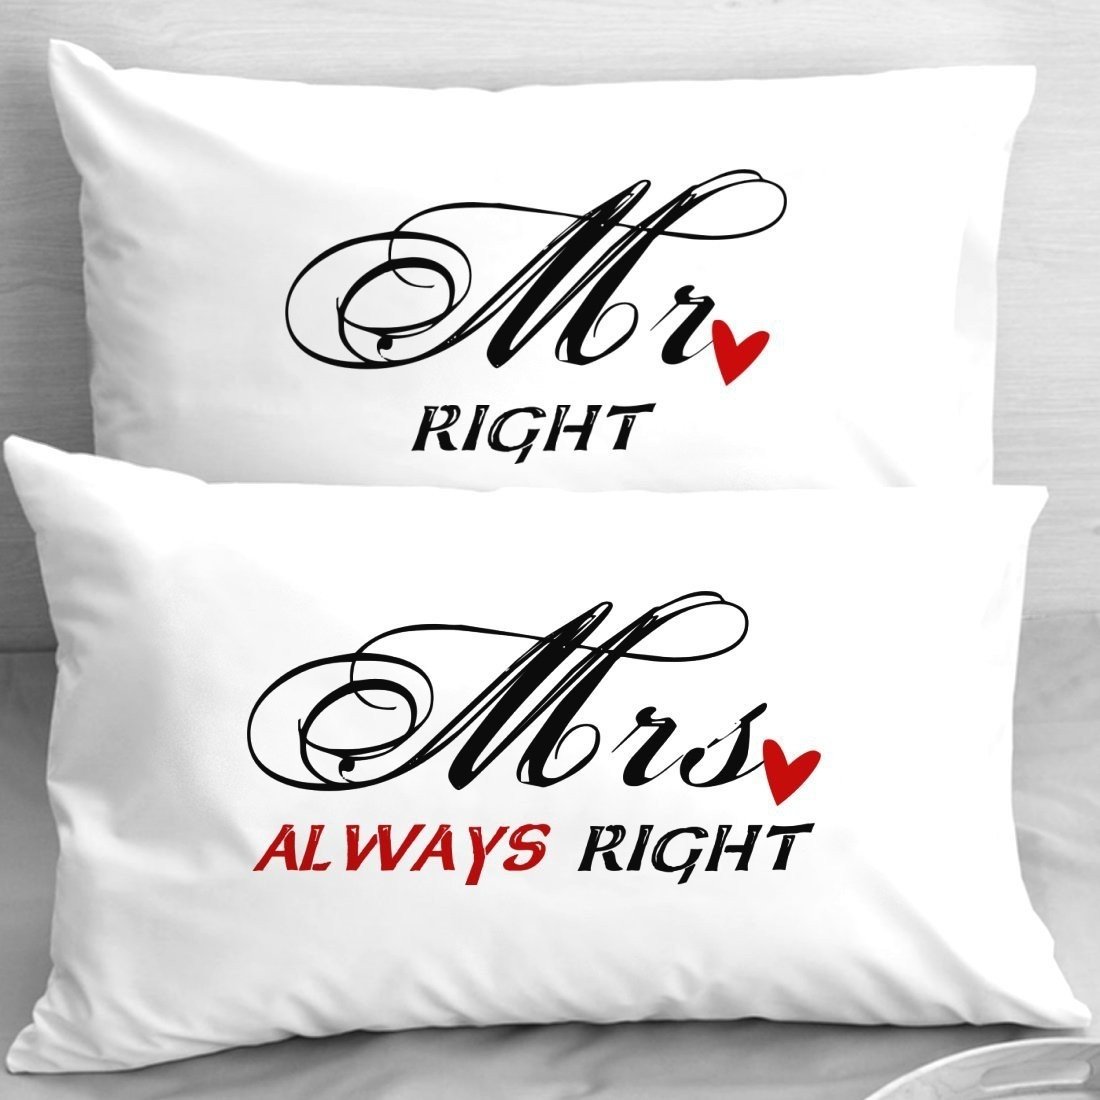 Gifts For 25th Wedding Anniversary To A Couple
 10 Stunning 25Th Wedding Anniversary Gift Ideas For